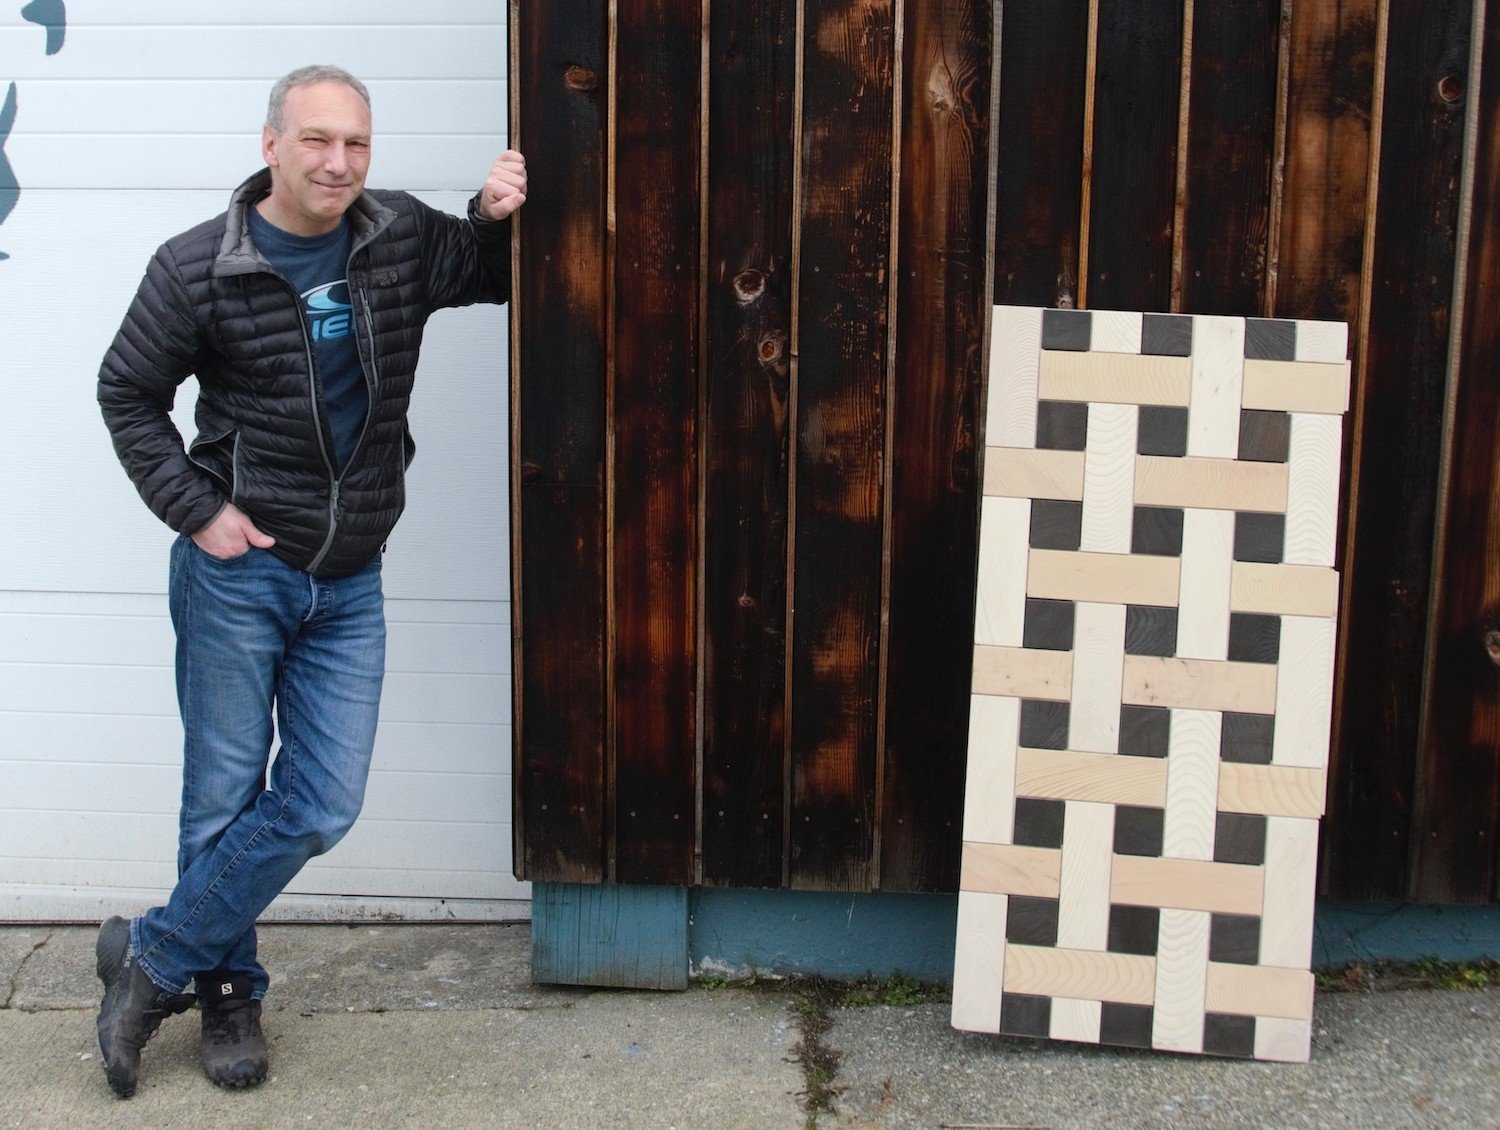 A man with short grey hair and light skin tone, wearing a black puffer jacket and jeans, leans against a wall covered with dark wood boards. A sample of light-coloured wooden tiles arranged in a checker pattern leans against the wall.